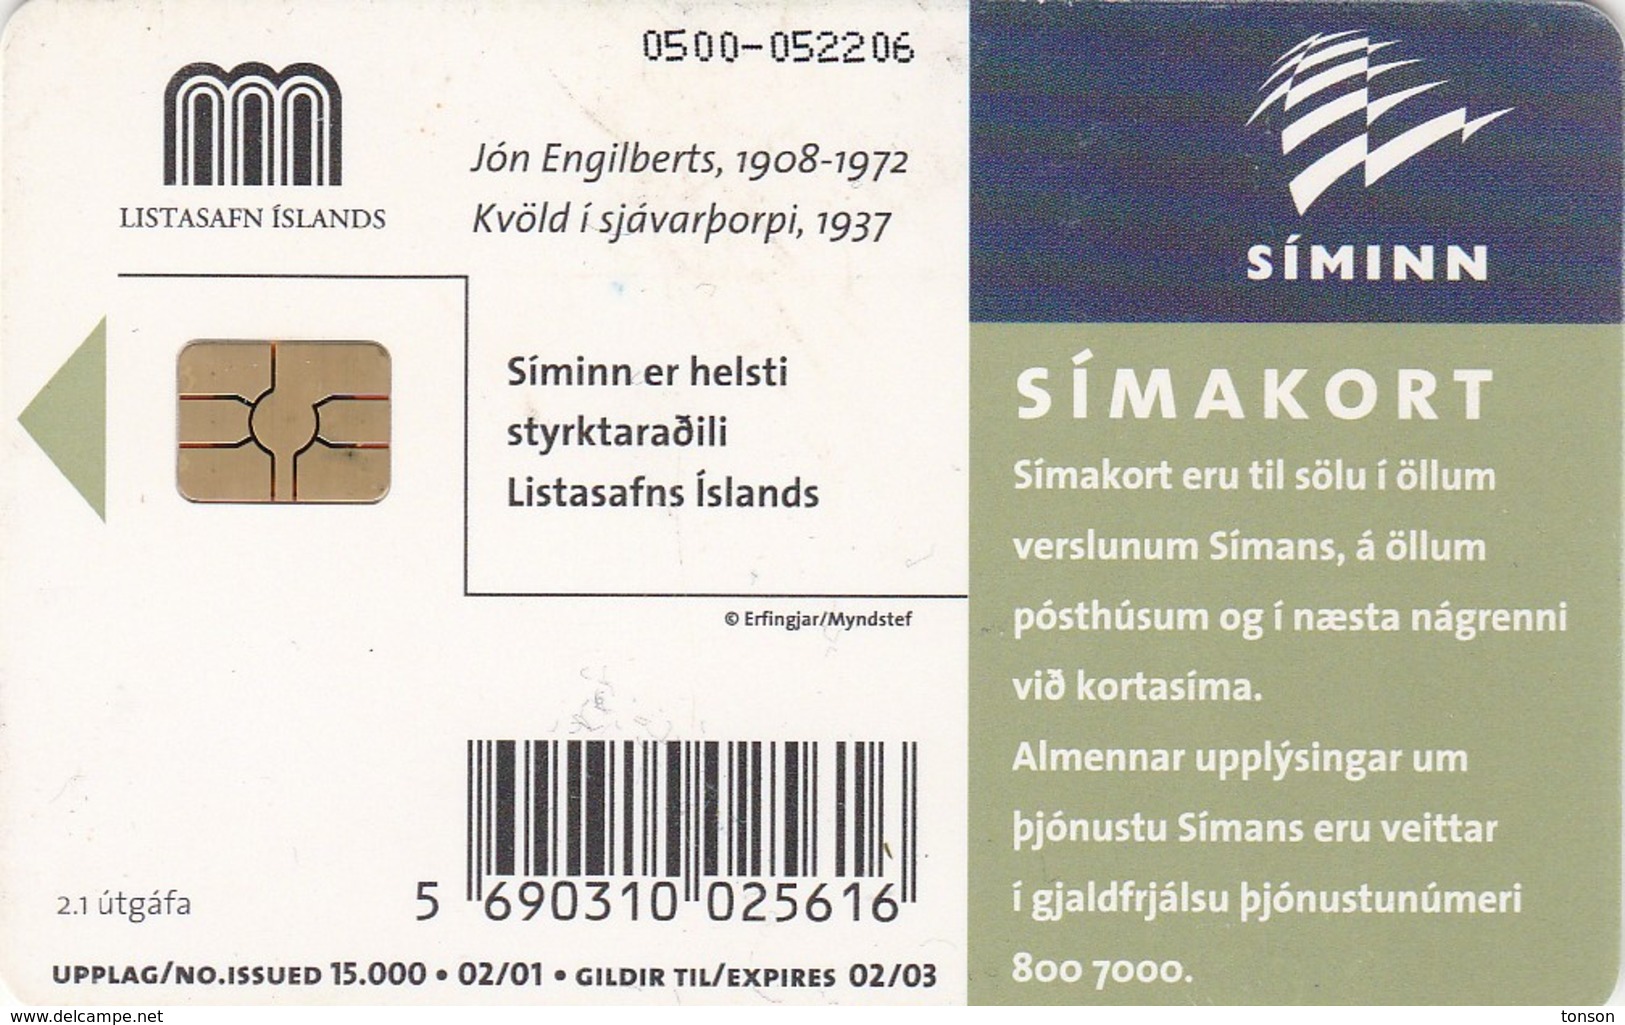 Iceland, ICE-C-02.1, 500 Kronur, Jon Engilberts's Painting, 2 Scans. Issued : 02/01 Expiry : 02/03, 2 Scans - Island